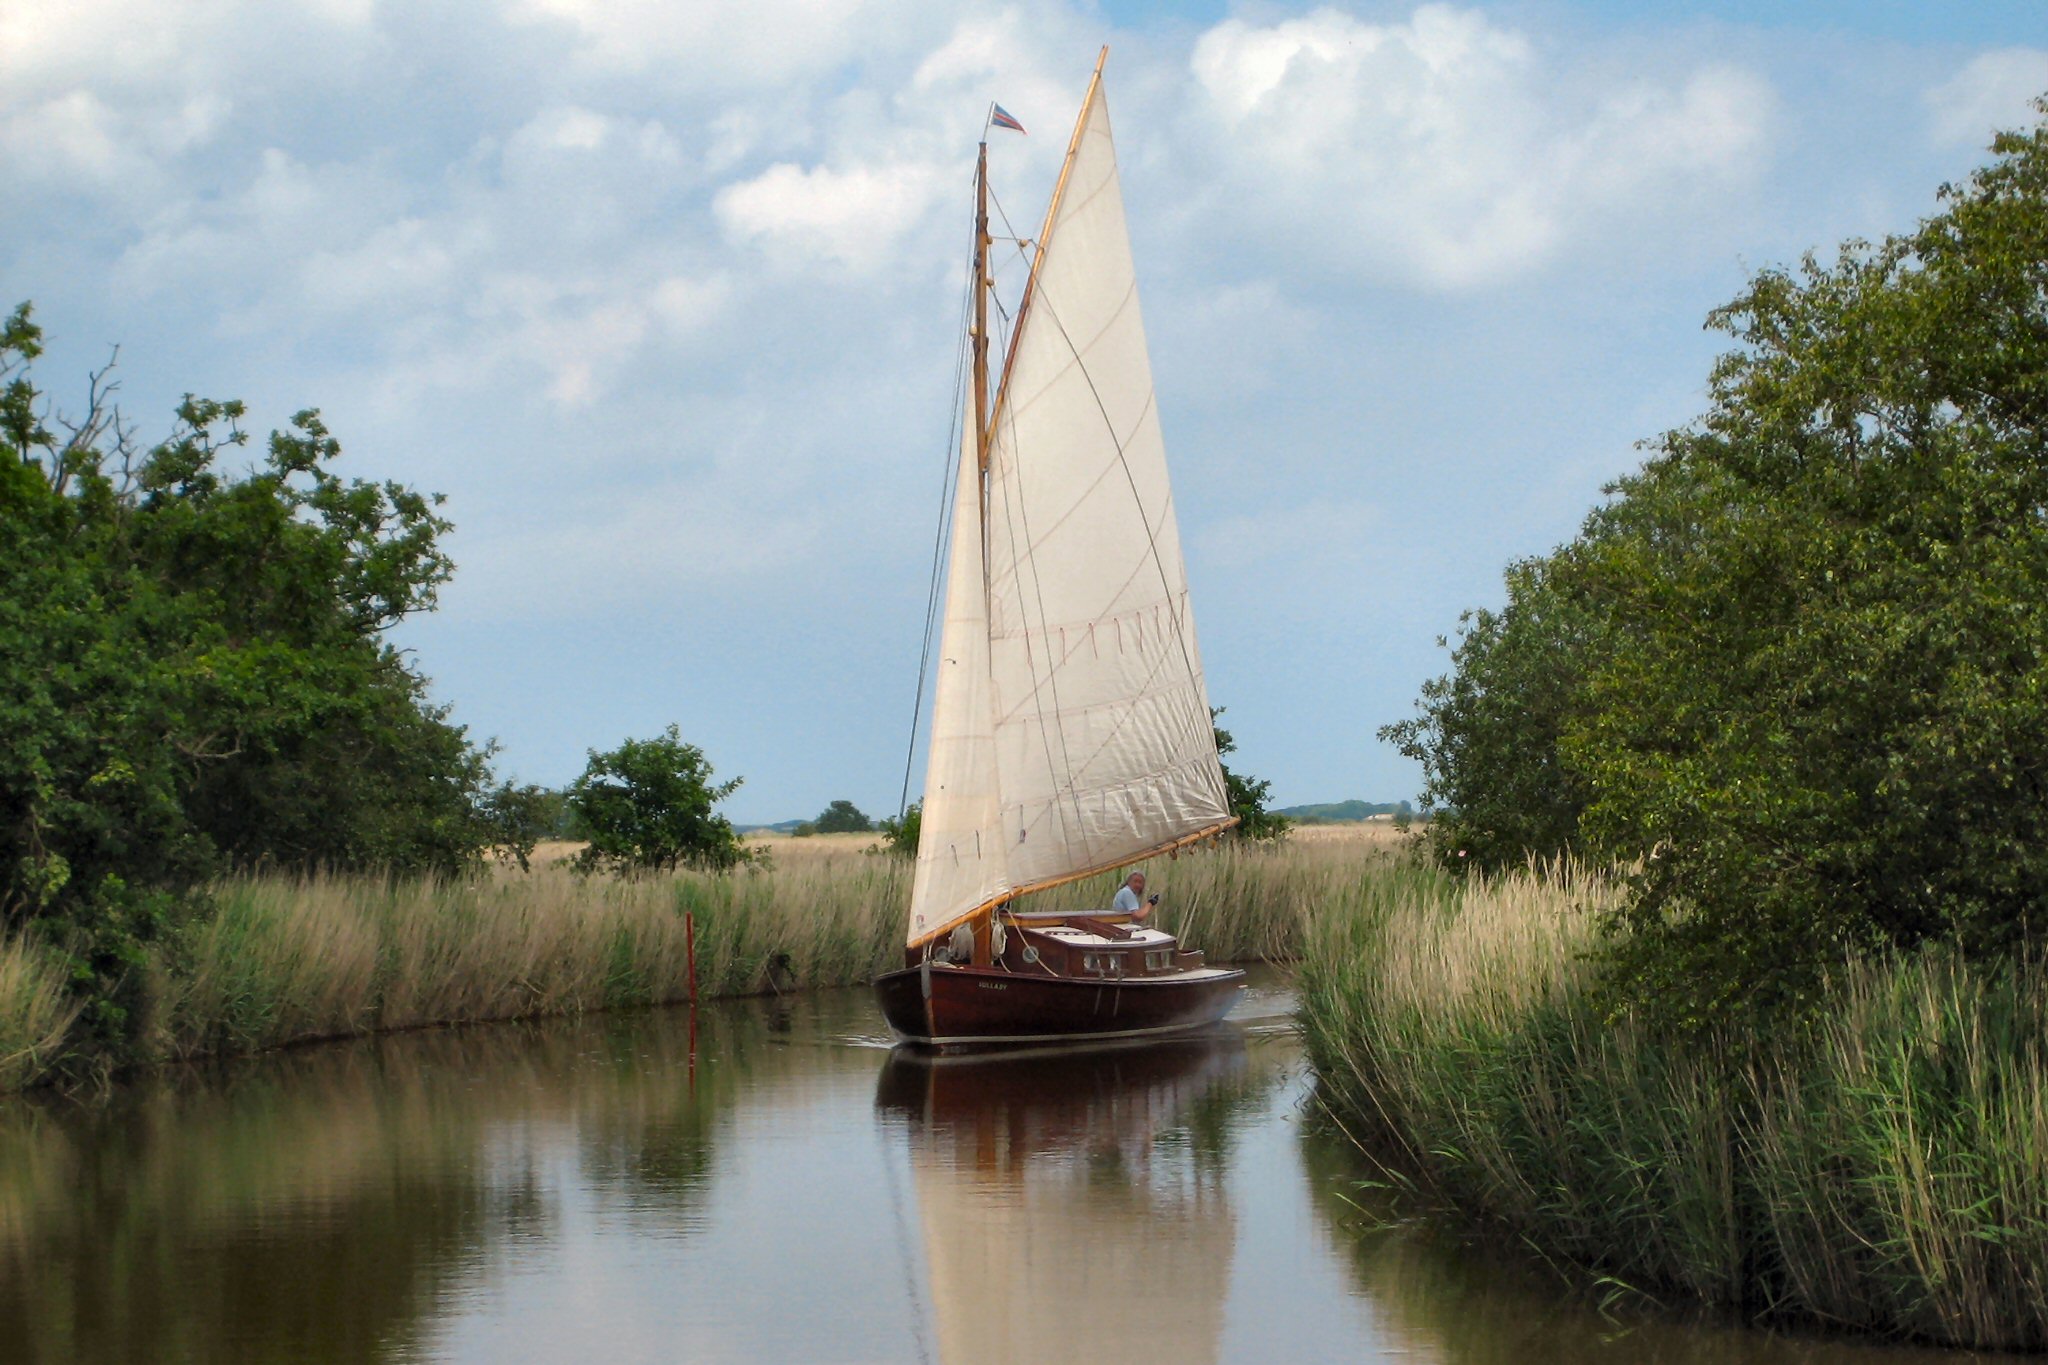 Lullaby sailing on the Broads